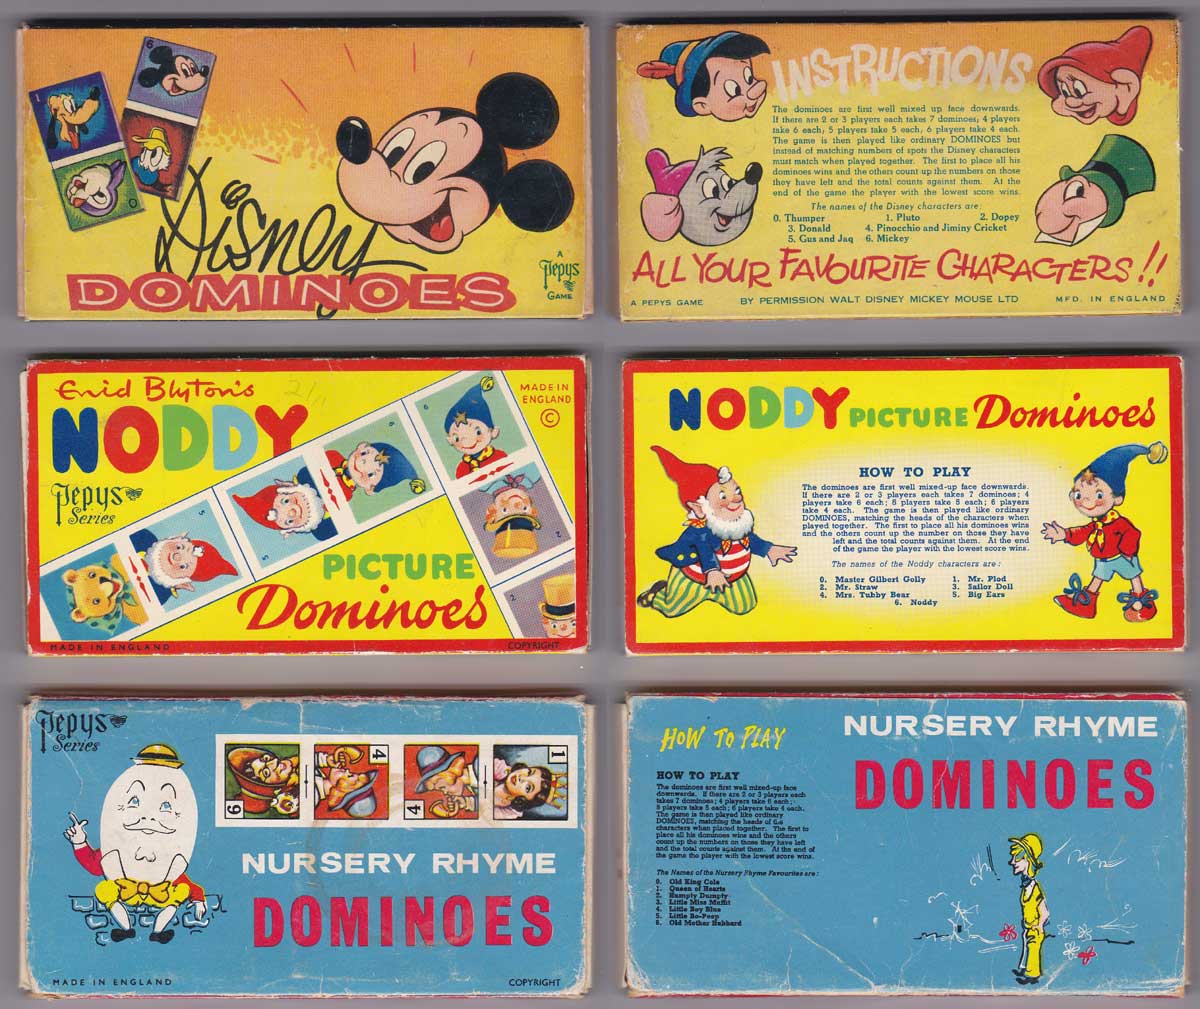 pictorial domino games published by Pepys